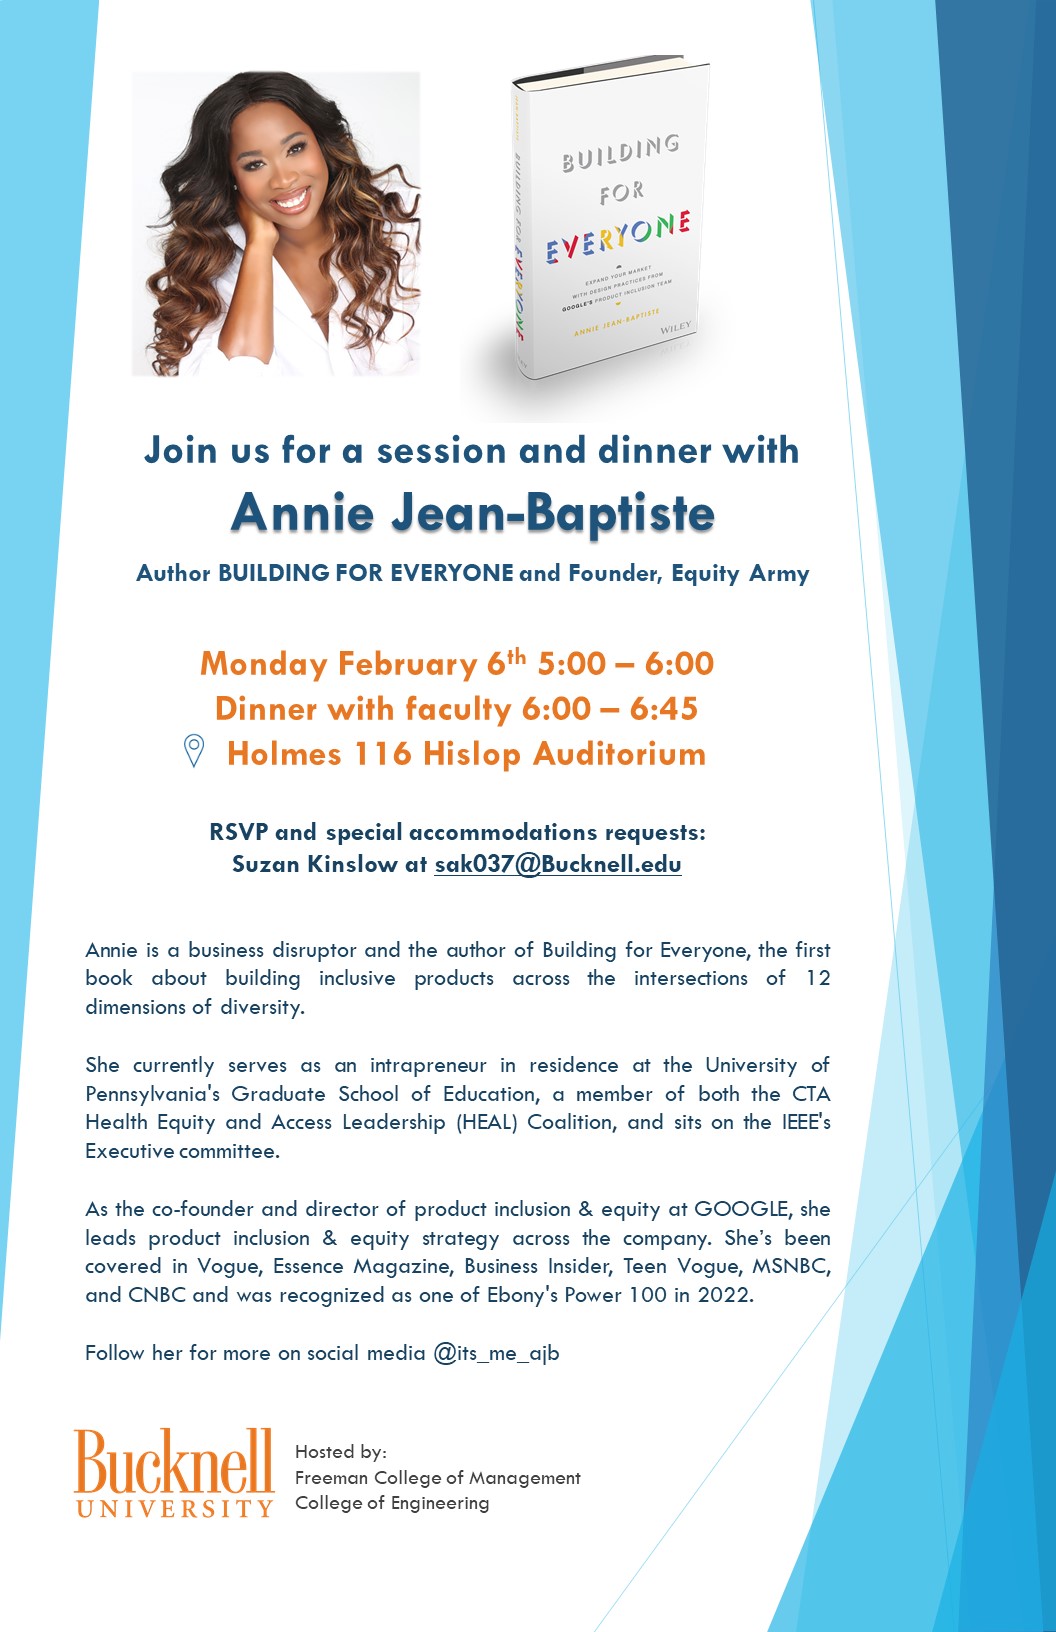 Join us for a session and dinner with Annie Jean-Baptiste, Author of BUILDING FOR EVERYONE and Founder, Equity Army.